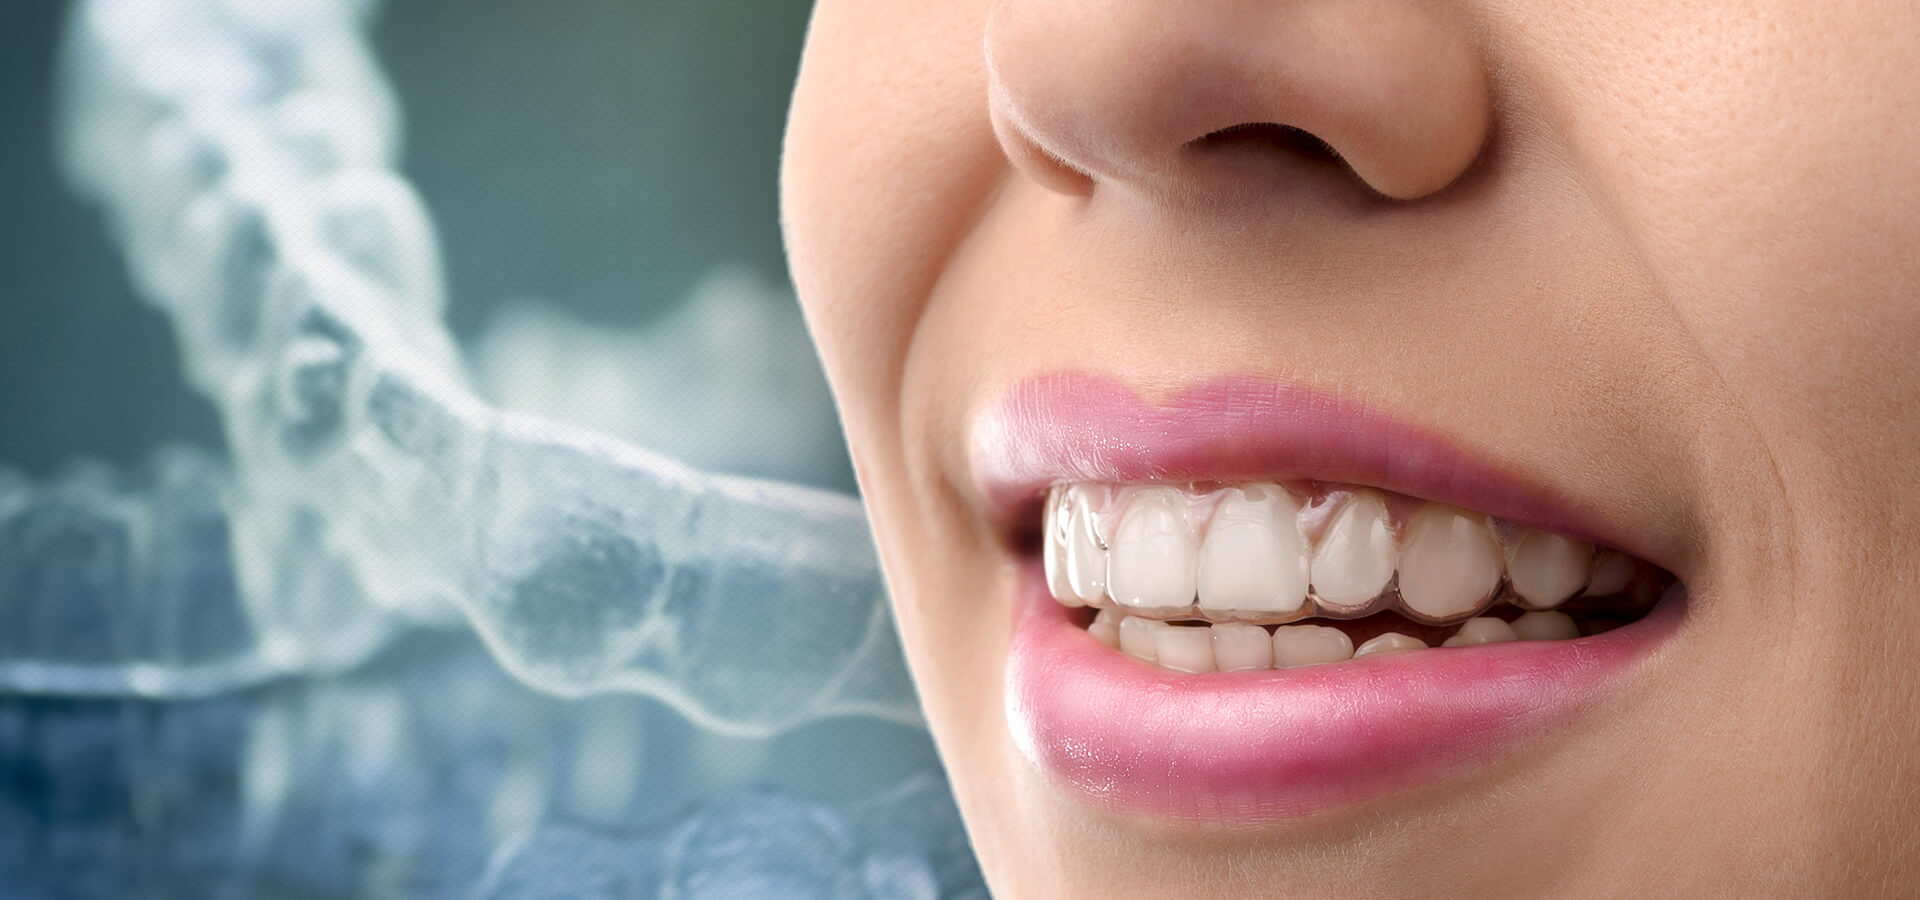 Close-up on Woman's Teeth in Invisalign Clear Aligners